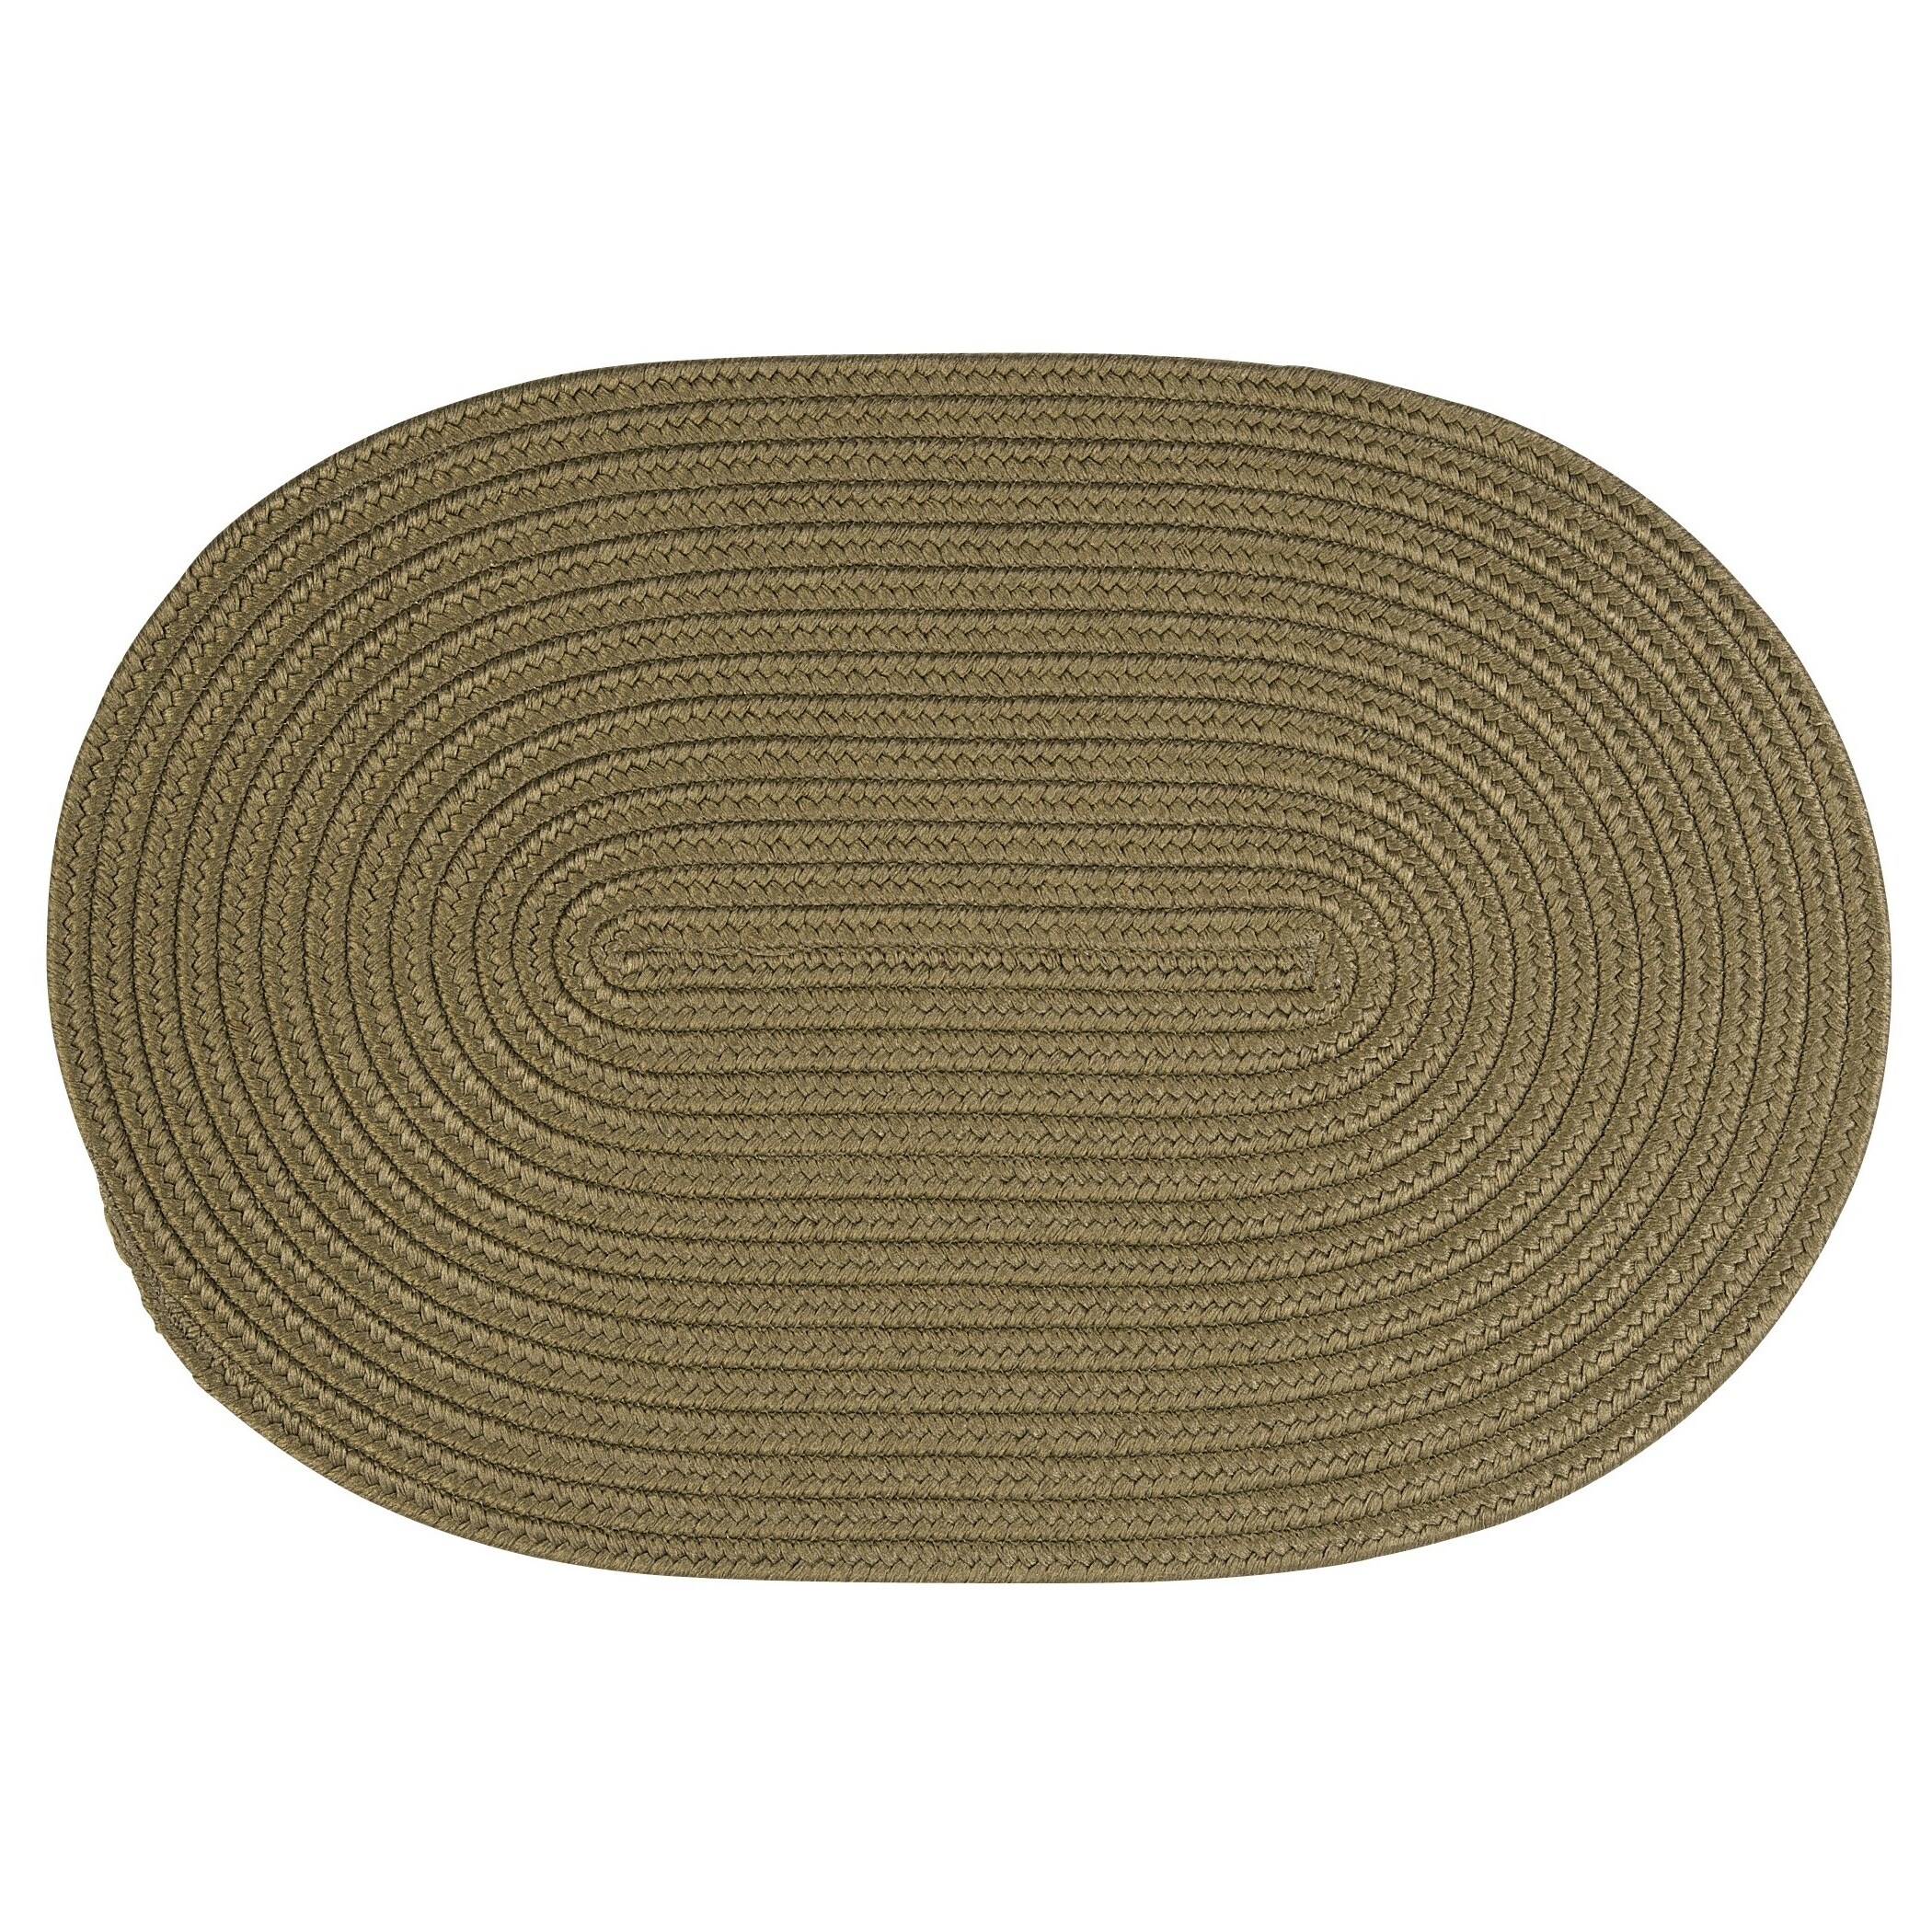 https://ak1.ostkcdn.com/images/products/is/images/direct/c66ebc685e4e9c1a23d1b55cee116da2f6127cd9/Indoor-Outdoor-Boca-Solid-Braided-Doormats.jpg